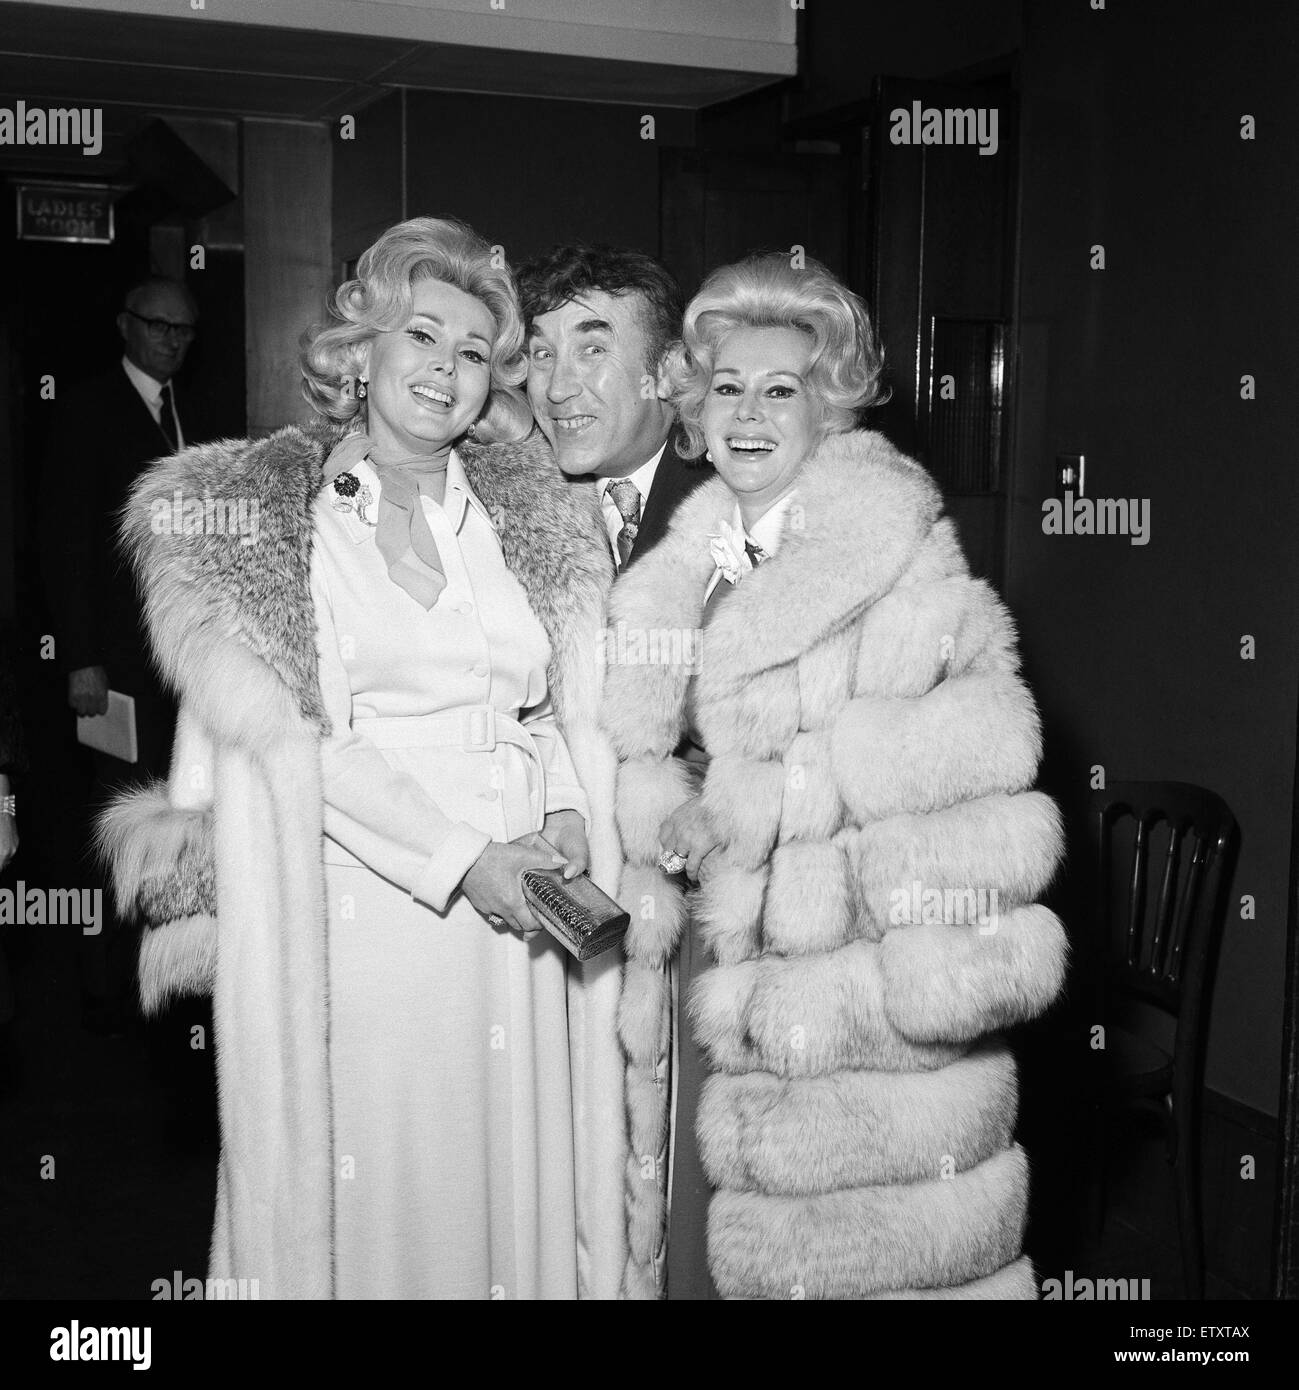 Frankie Howerd, took the two Gabor sisters Eva and Zsa Zsa, out for a different evening's entertainment watching greyhound racing at White City. The trio arrive at the top floor restaurant.  25th March 1972. Stock Photo